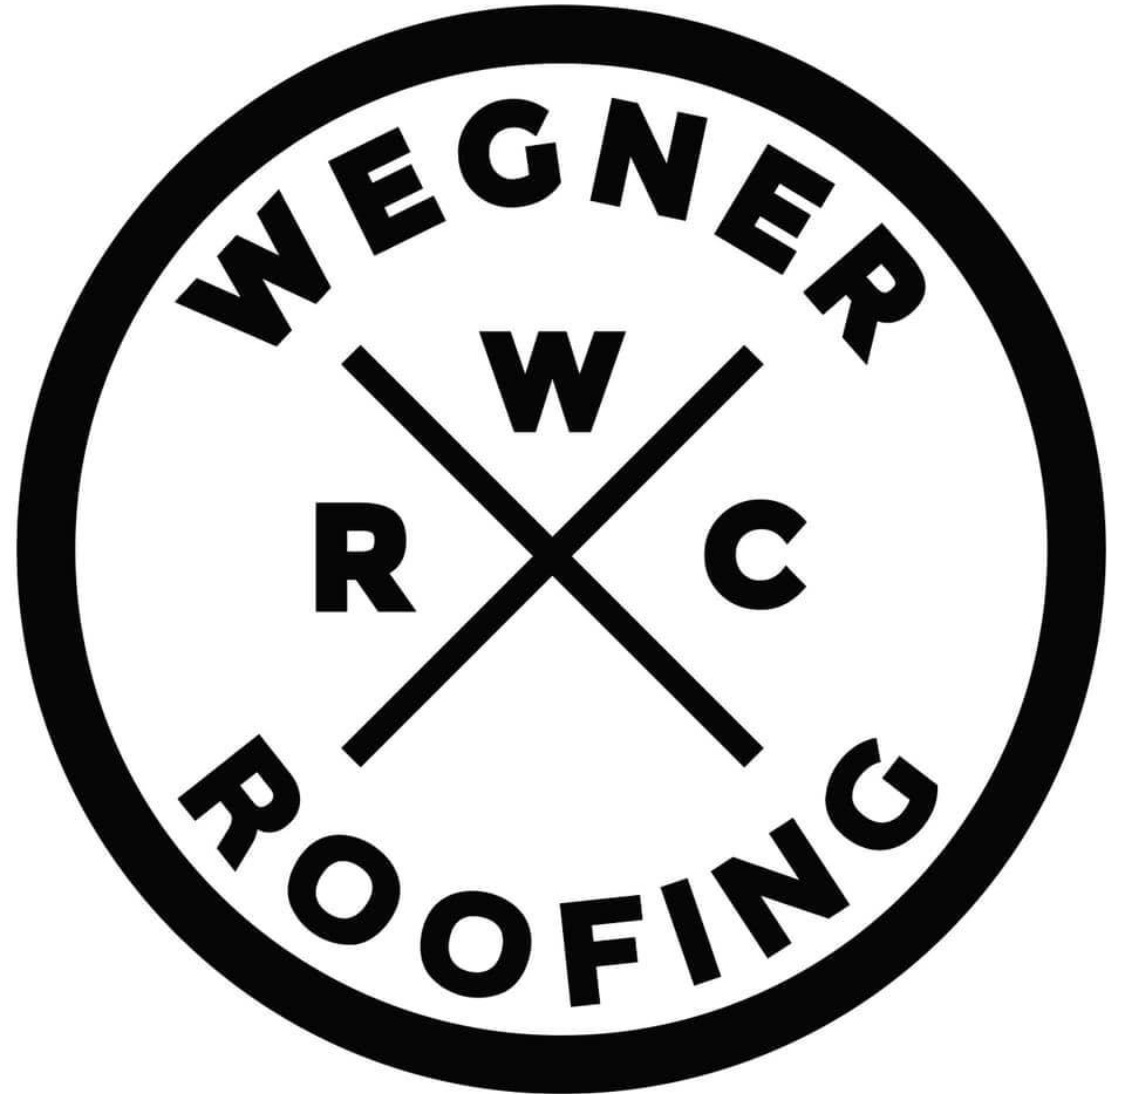 Wegner Roofing Is Offering Affordable Roofing Solutions